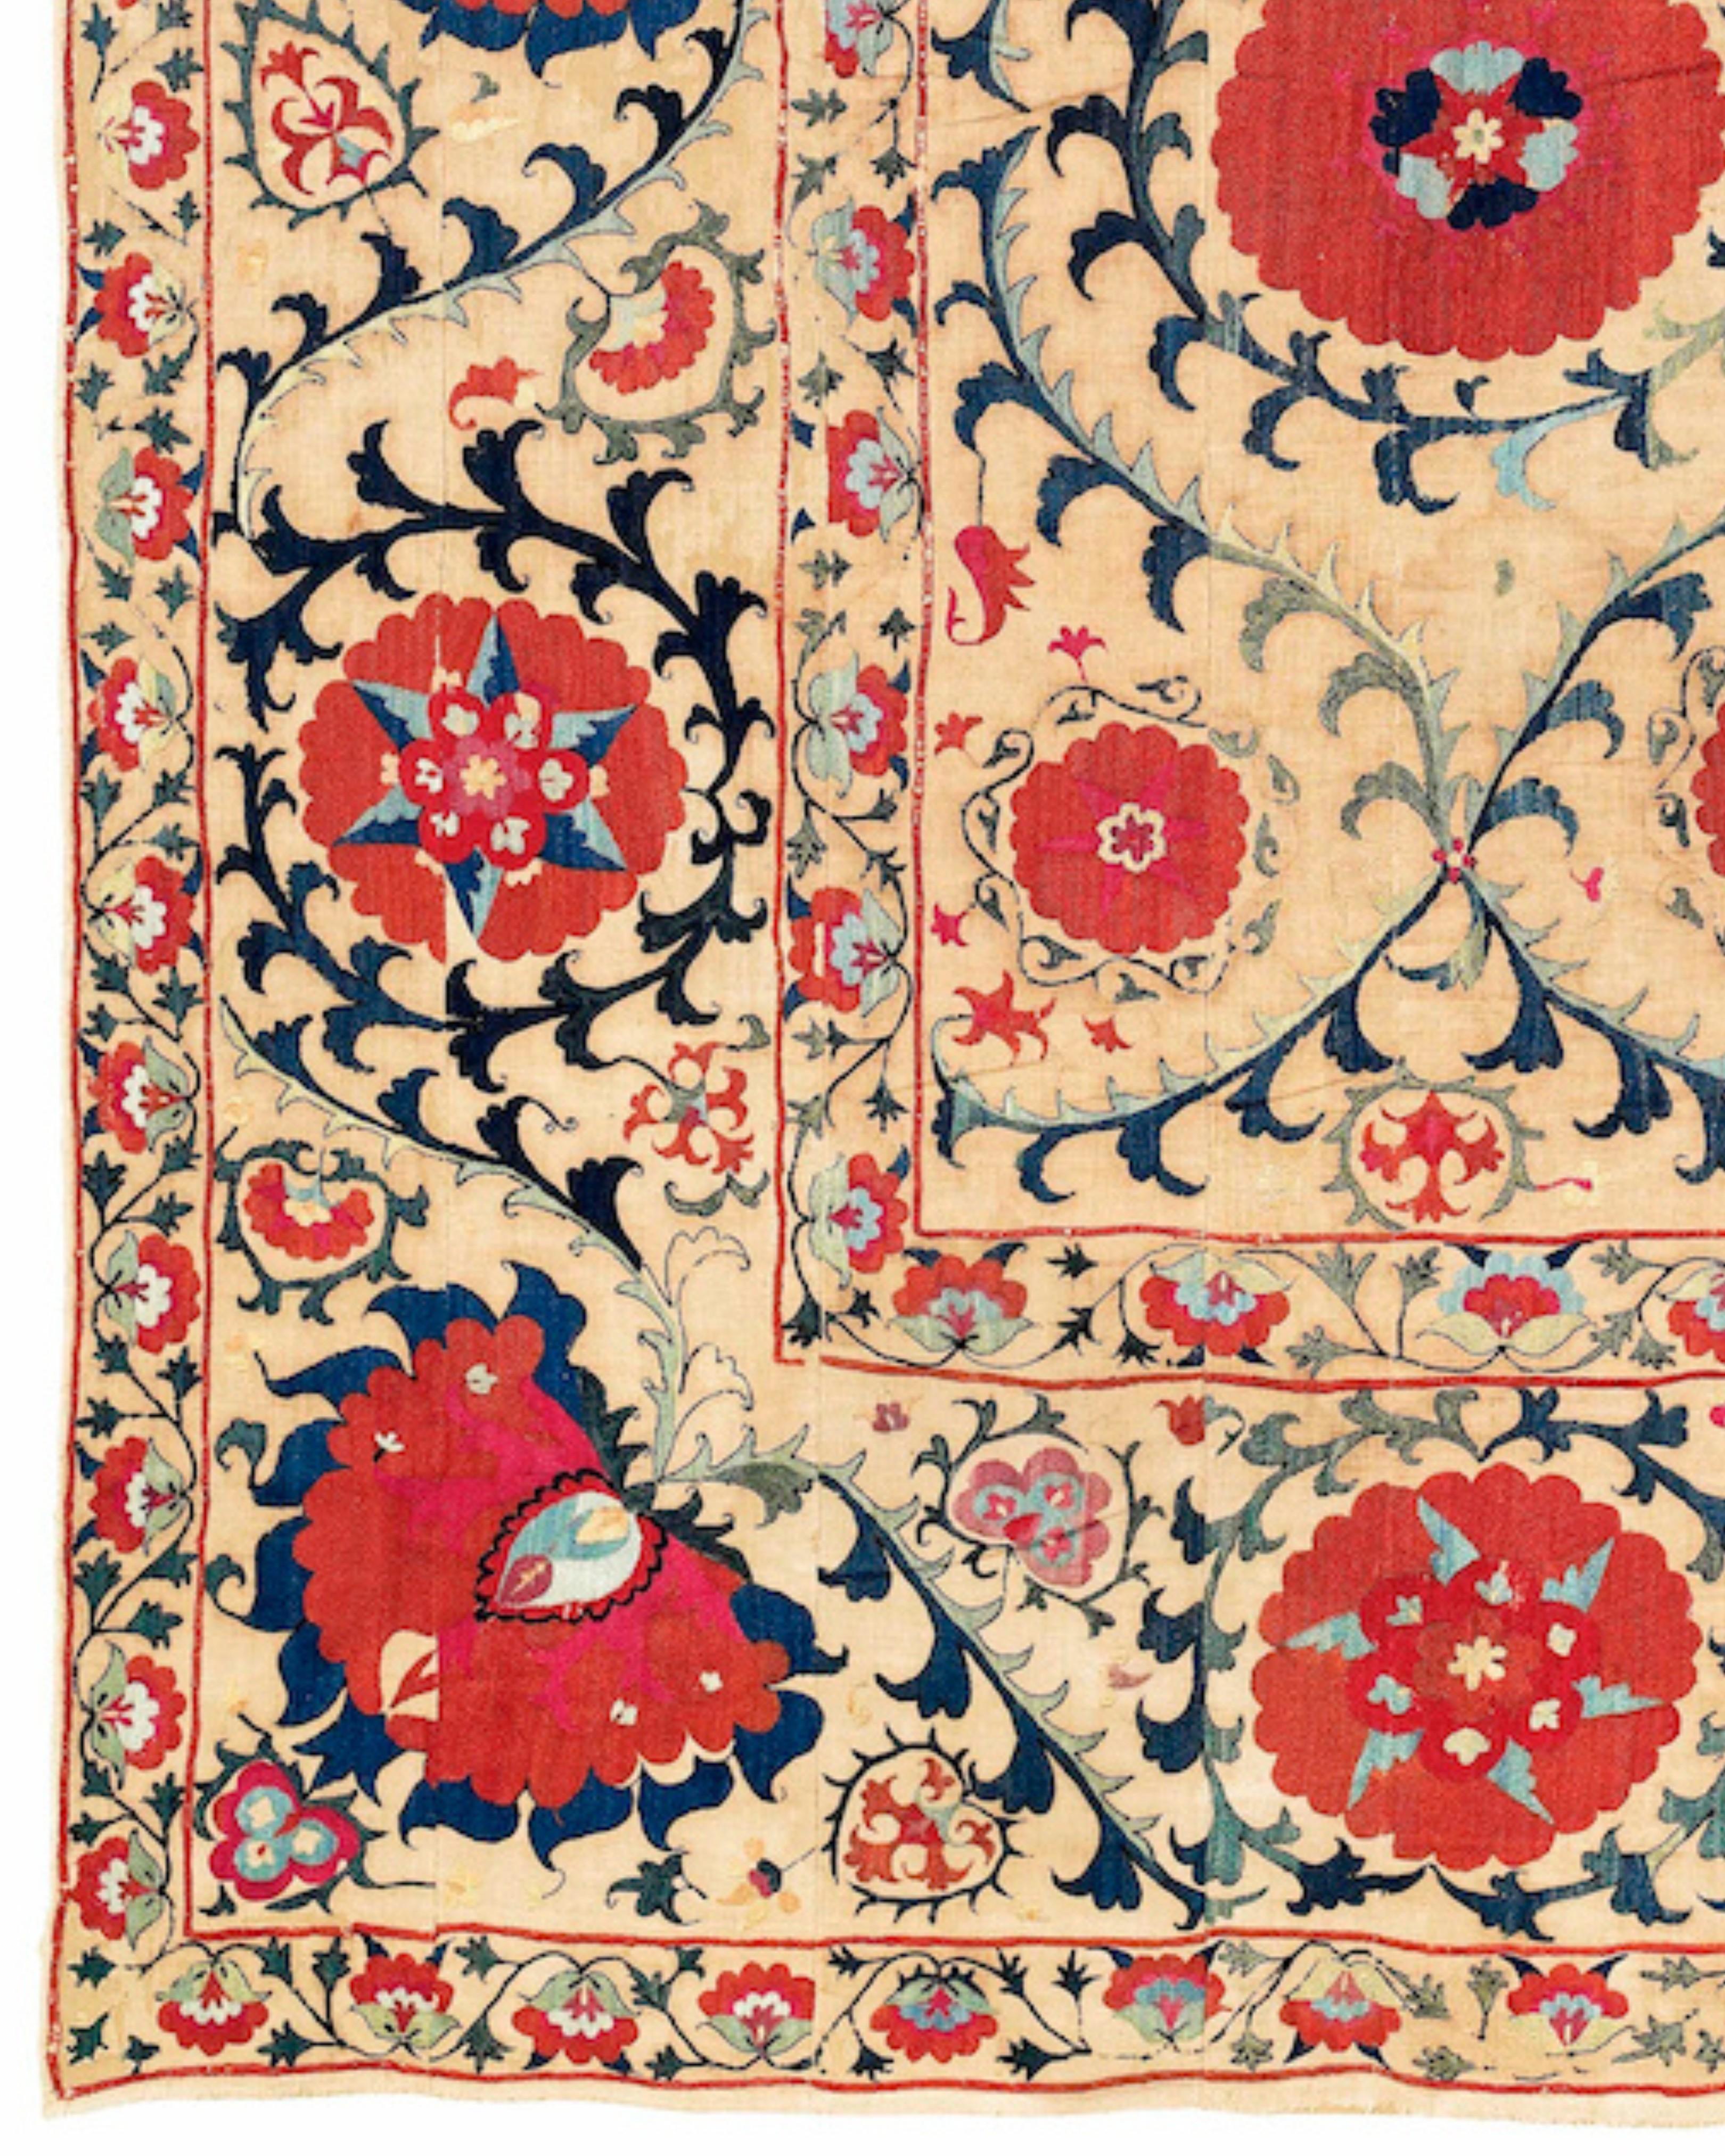 Hand-Knotted Antique Uzbek Suzani Embroidery Rug, c. 1800 For Sale